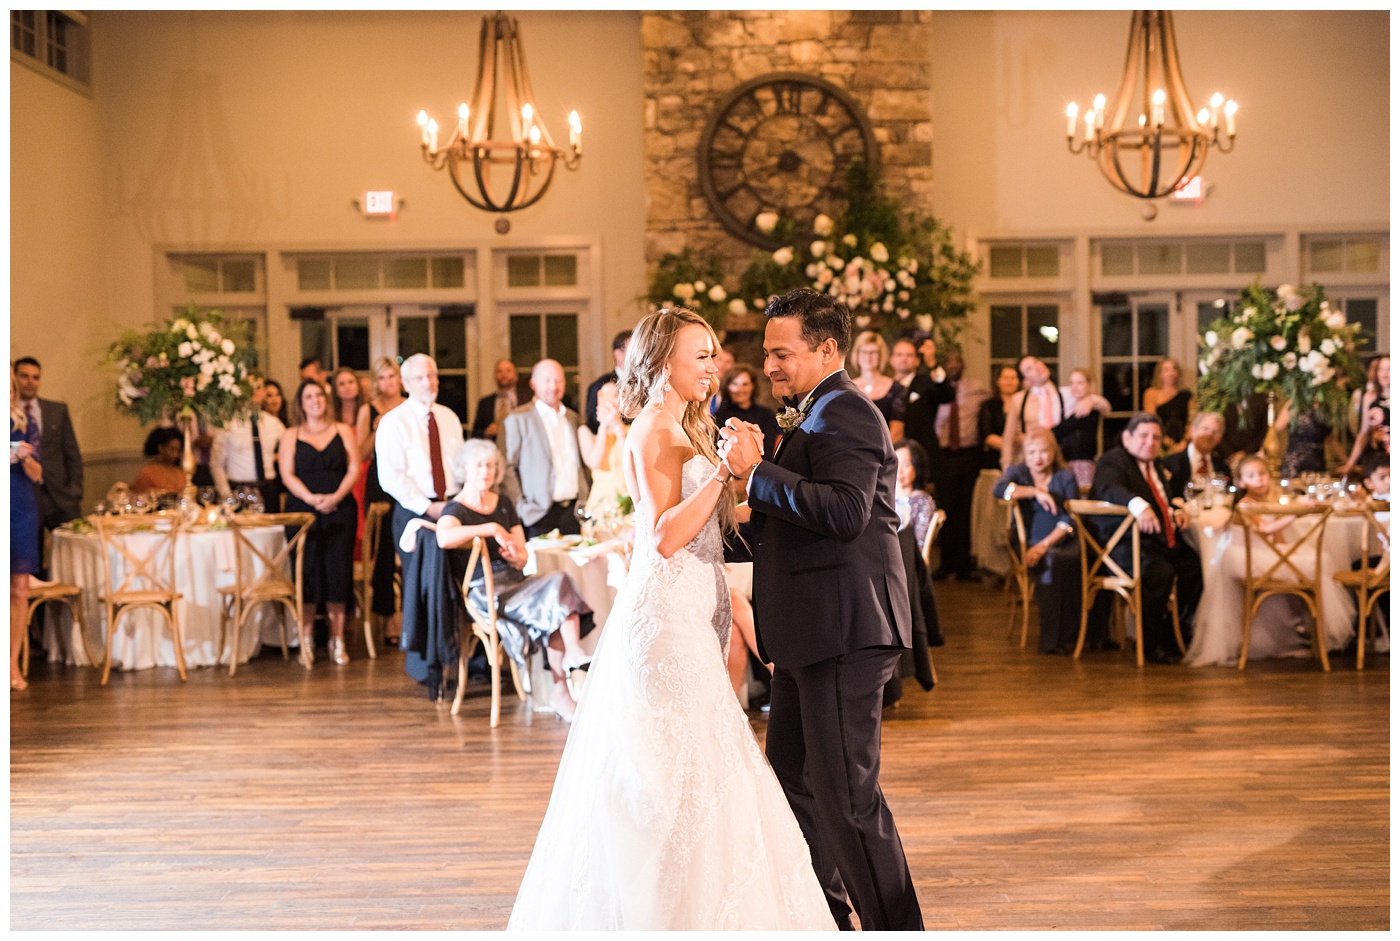 Bride and Groom first dance at King Family Vineyard in Charlottesville VA 